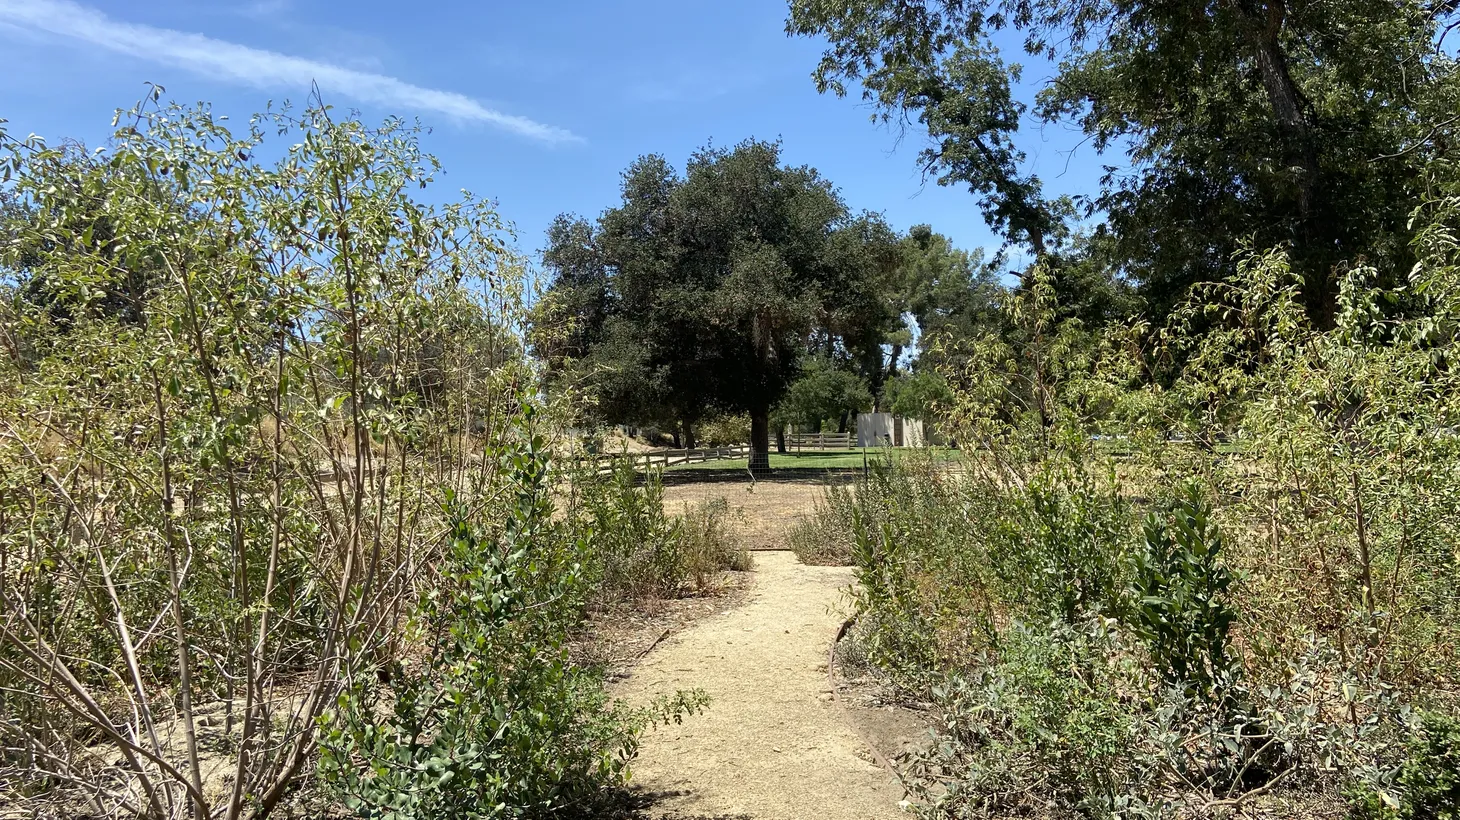 One year after Katherine Pakradouni helped plant this microforest, it continues to grow and provide a habitat for various creatures in Griffith Park. Her goal is to have many more microforests planted around greater LA in the coming years."